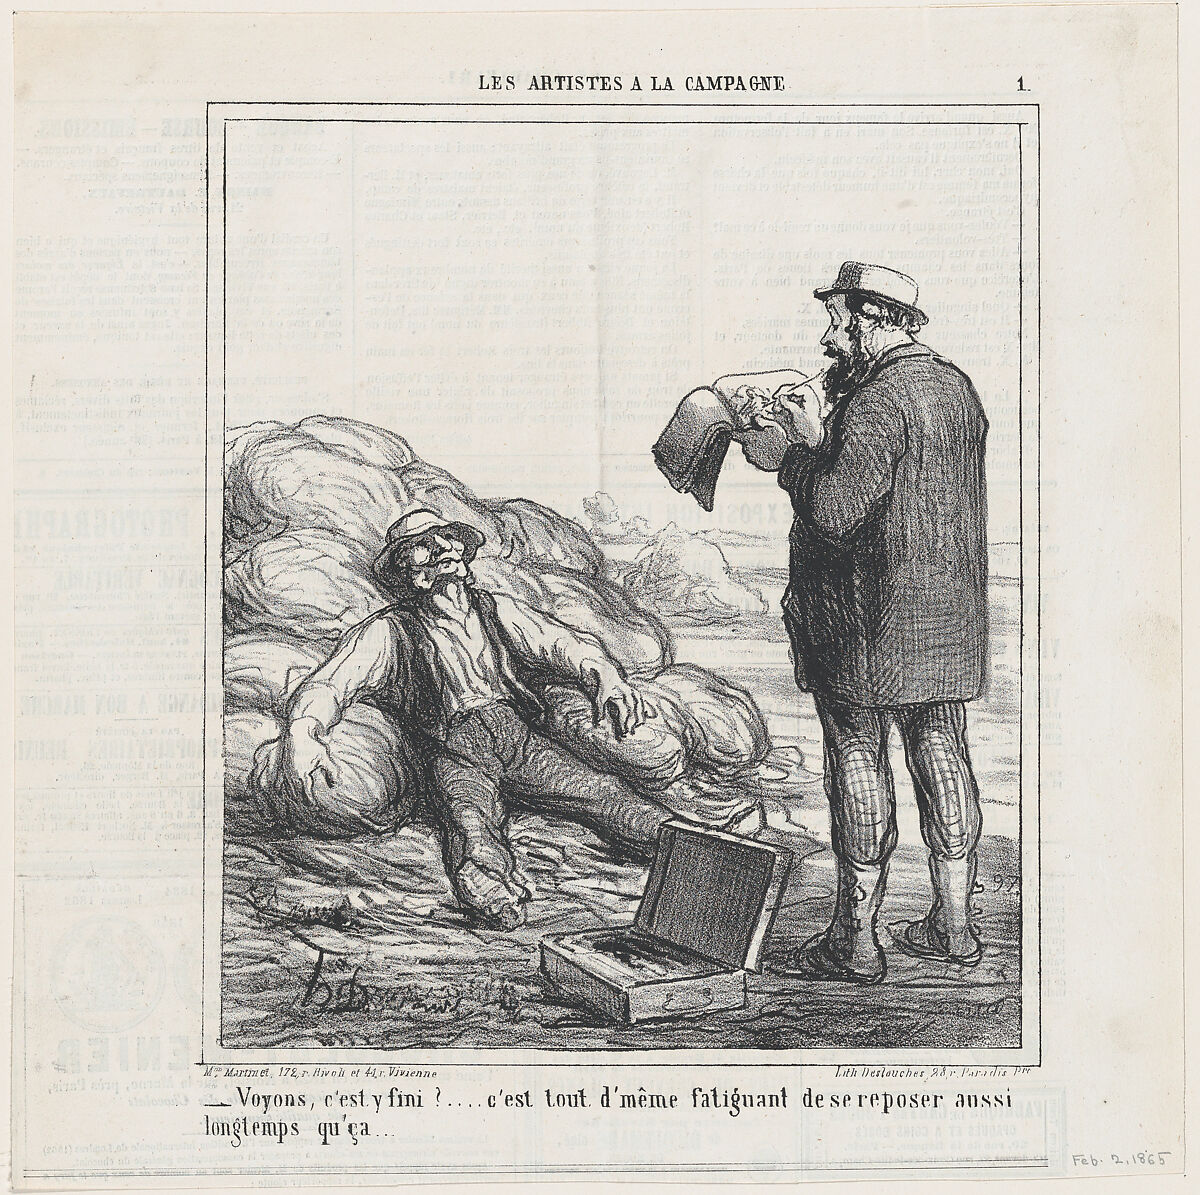 Well, are you finally finished?... after all, it's tiring to relax for such a long time, from 'The countryside artists,' published in Le Charivari, February 2, 1865, Honoré Daumier (French, Marseilles 1808–1879 Valmondois), Lithograph on newsprint 